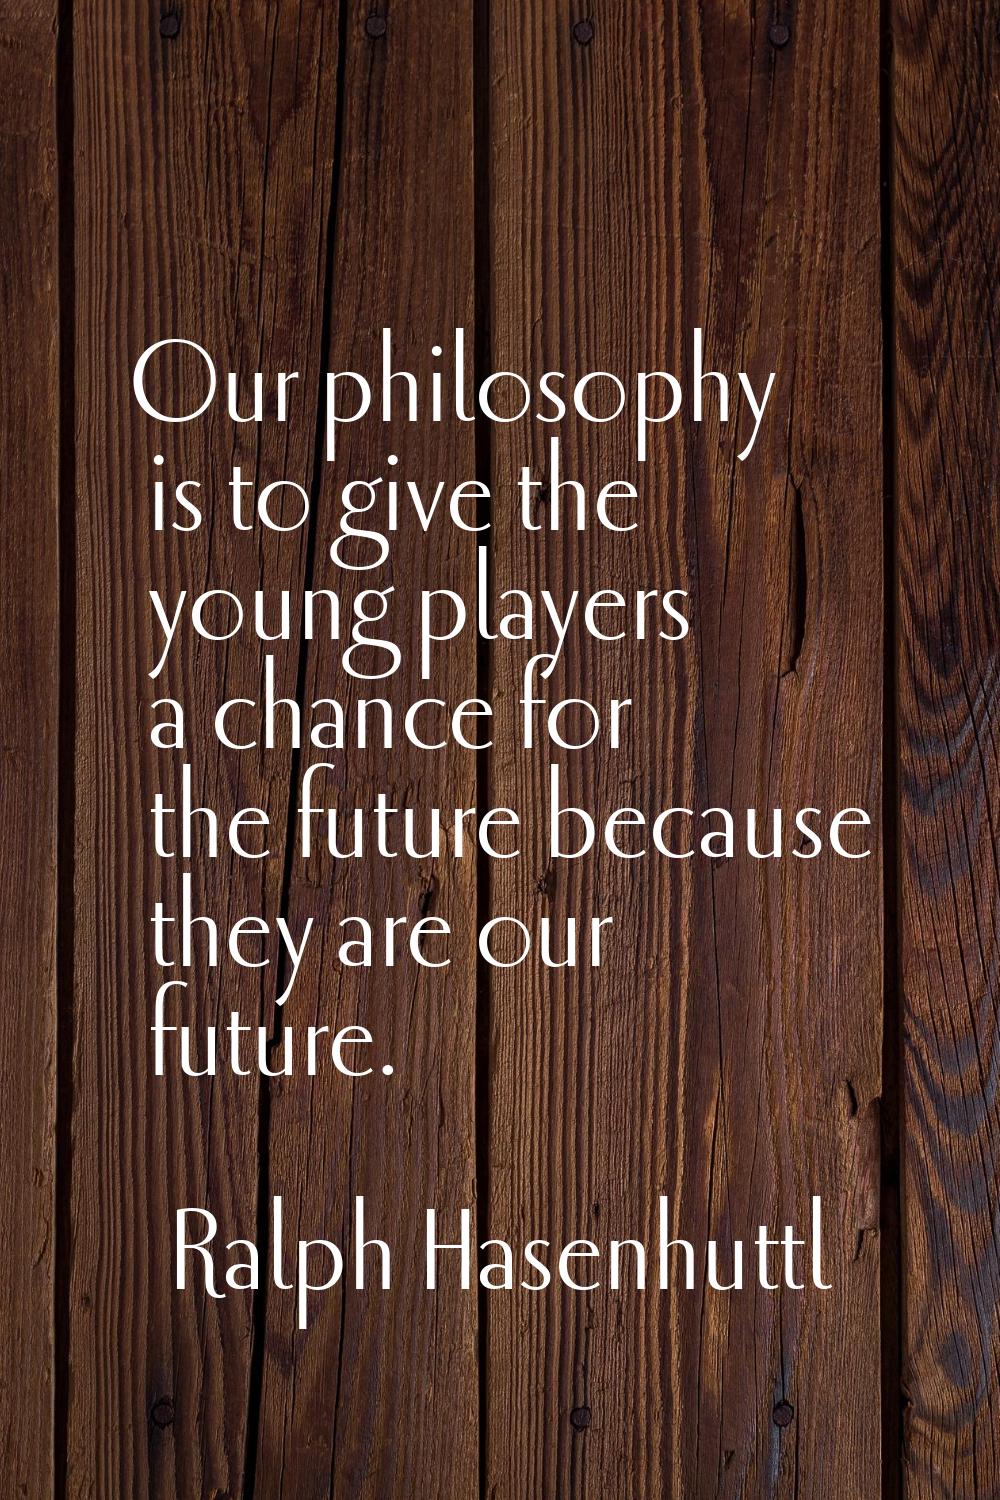 Our philosophy is to give the young players a chance for the future because they are our future.